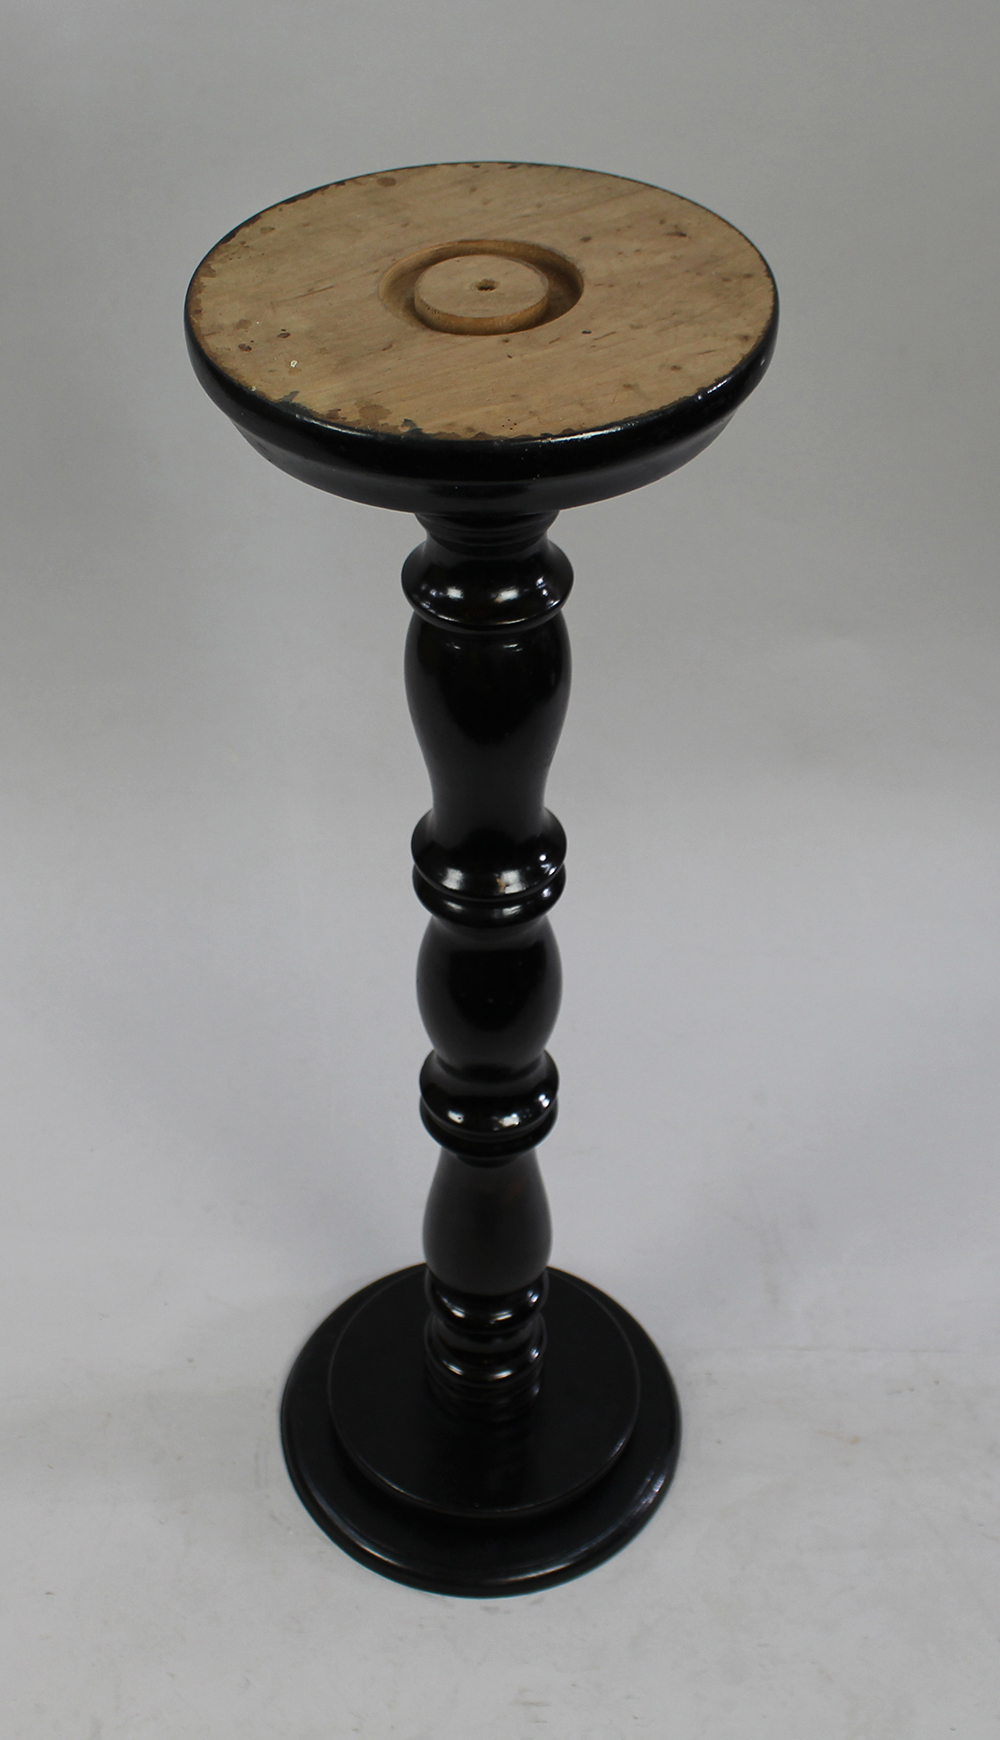 Early 20th c. Ebonized Wooden Pedestal - Image 3 of 3